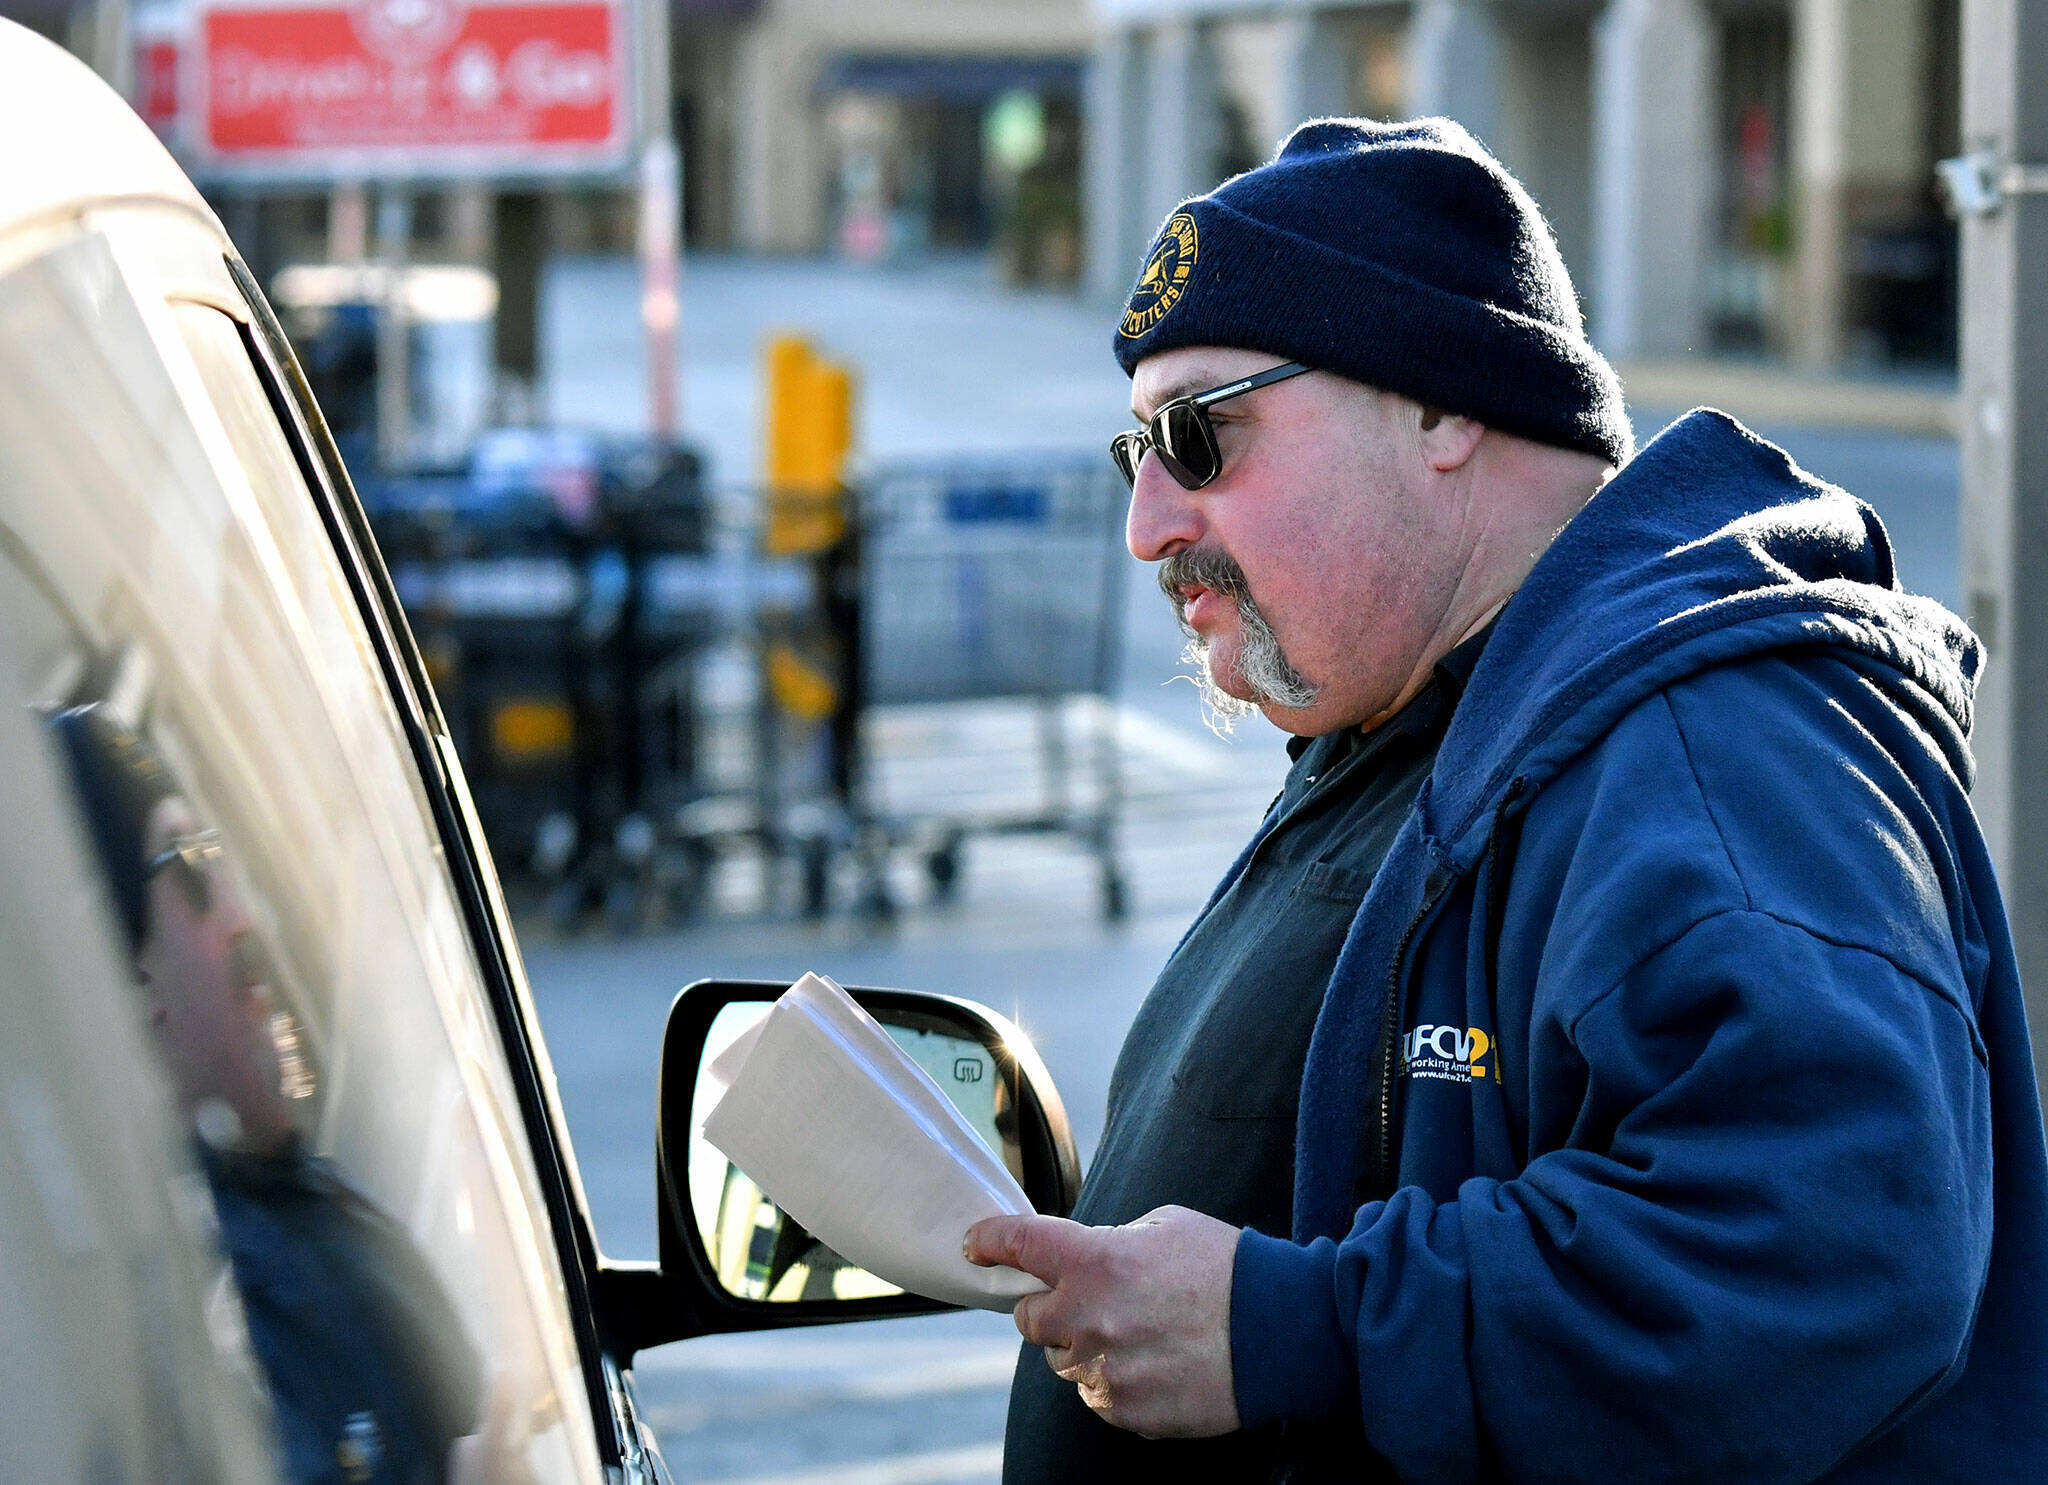 Kevin Flynn, a meat-cutter with the Marysville Albertsons, speaks with a passenger in a vehicle during a leaflet campaign on Wednesday. Flynn was one of about a dozen grocery store workers handing out leaflets to shoppers about the proposed merger between Albertsons and Kroger. (Mike Henneke / The Herald)